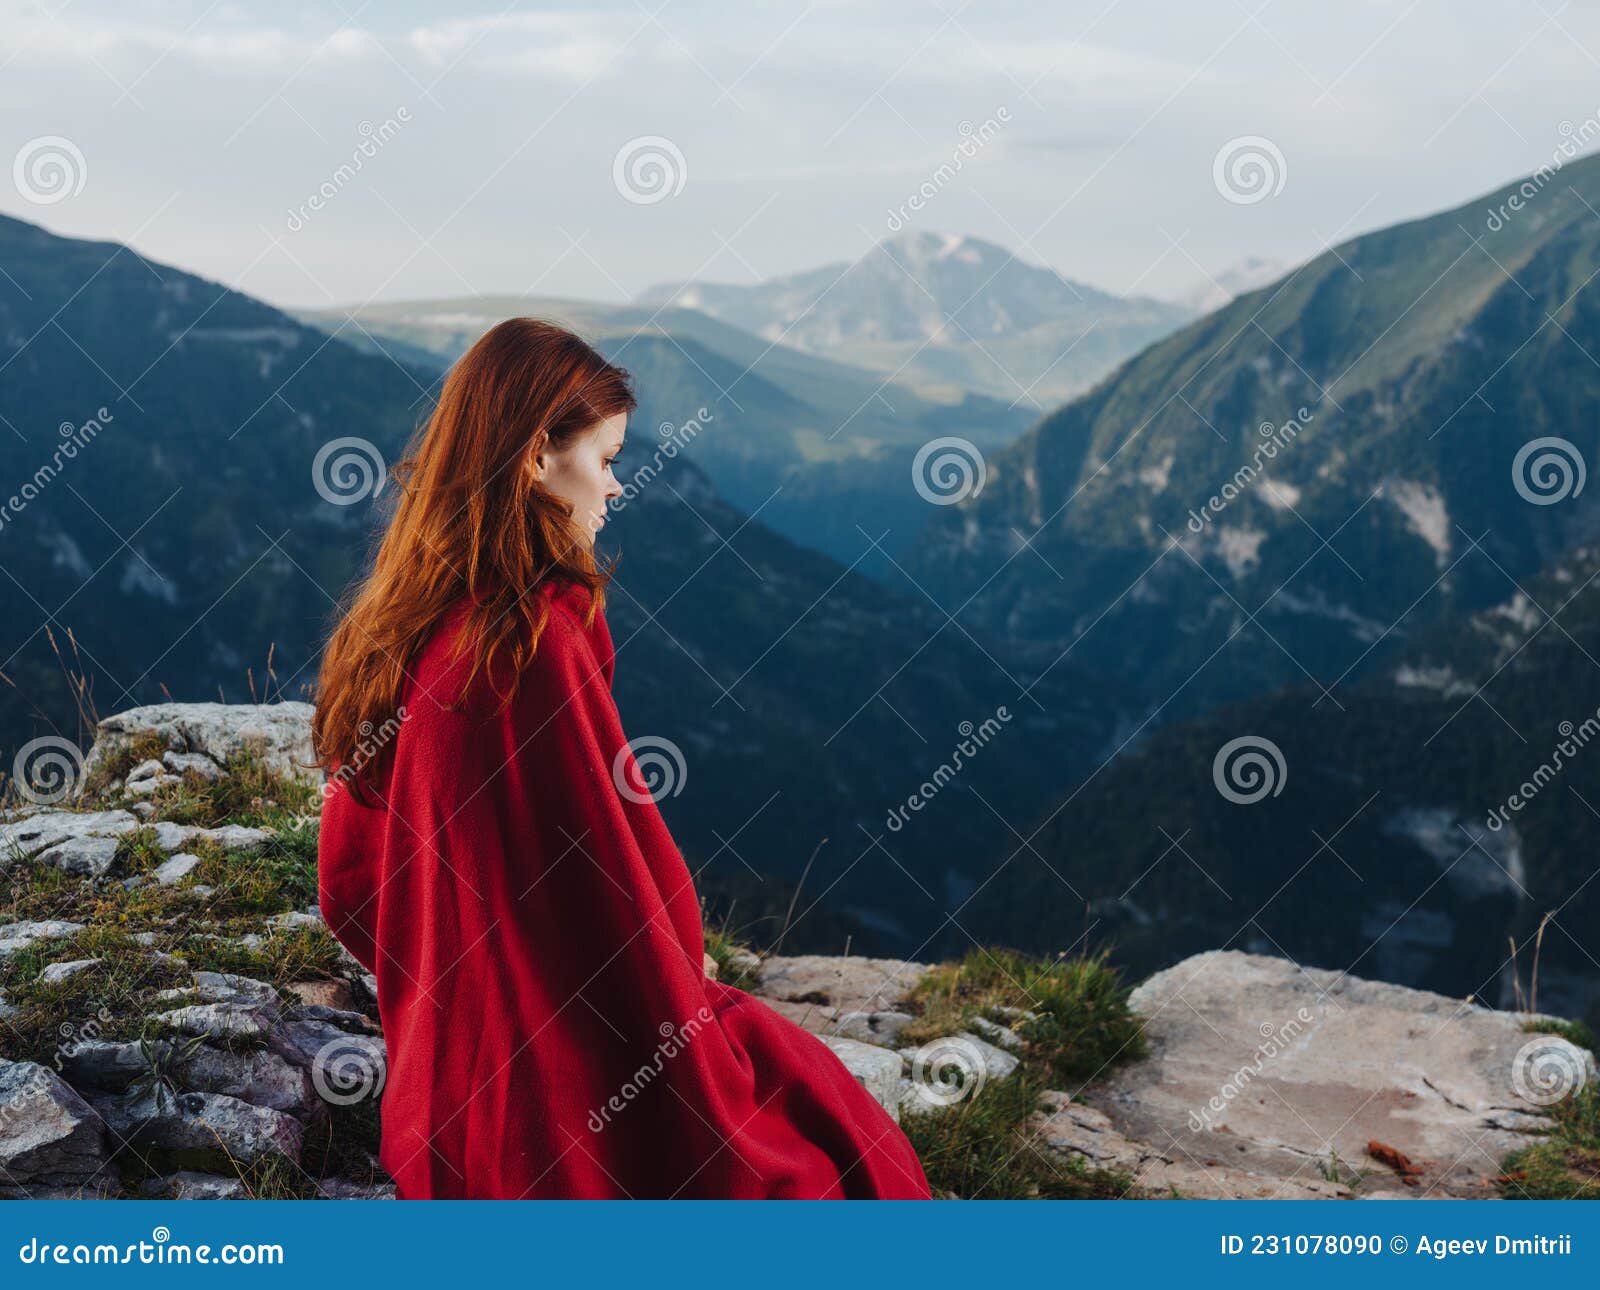 woman with red plaid cool air mountains nature